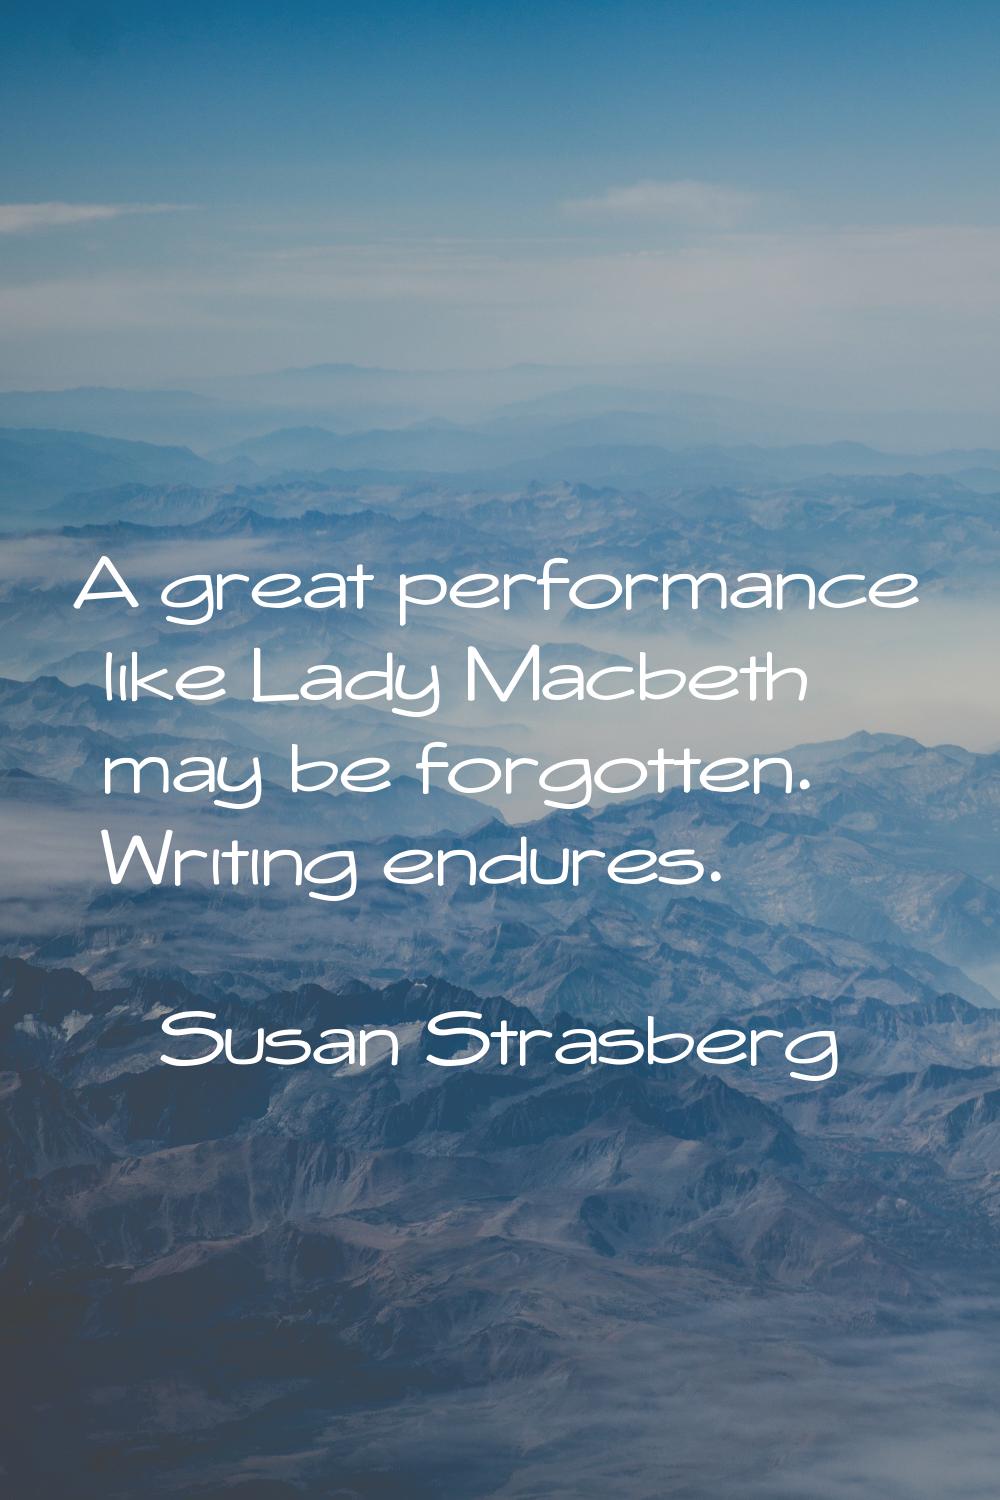 A great performance like Lady Macbeth may be forgotten. Writing endures.